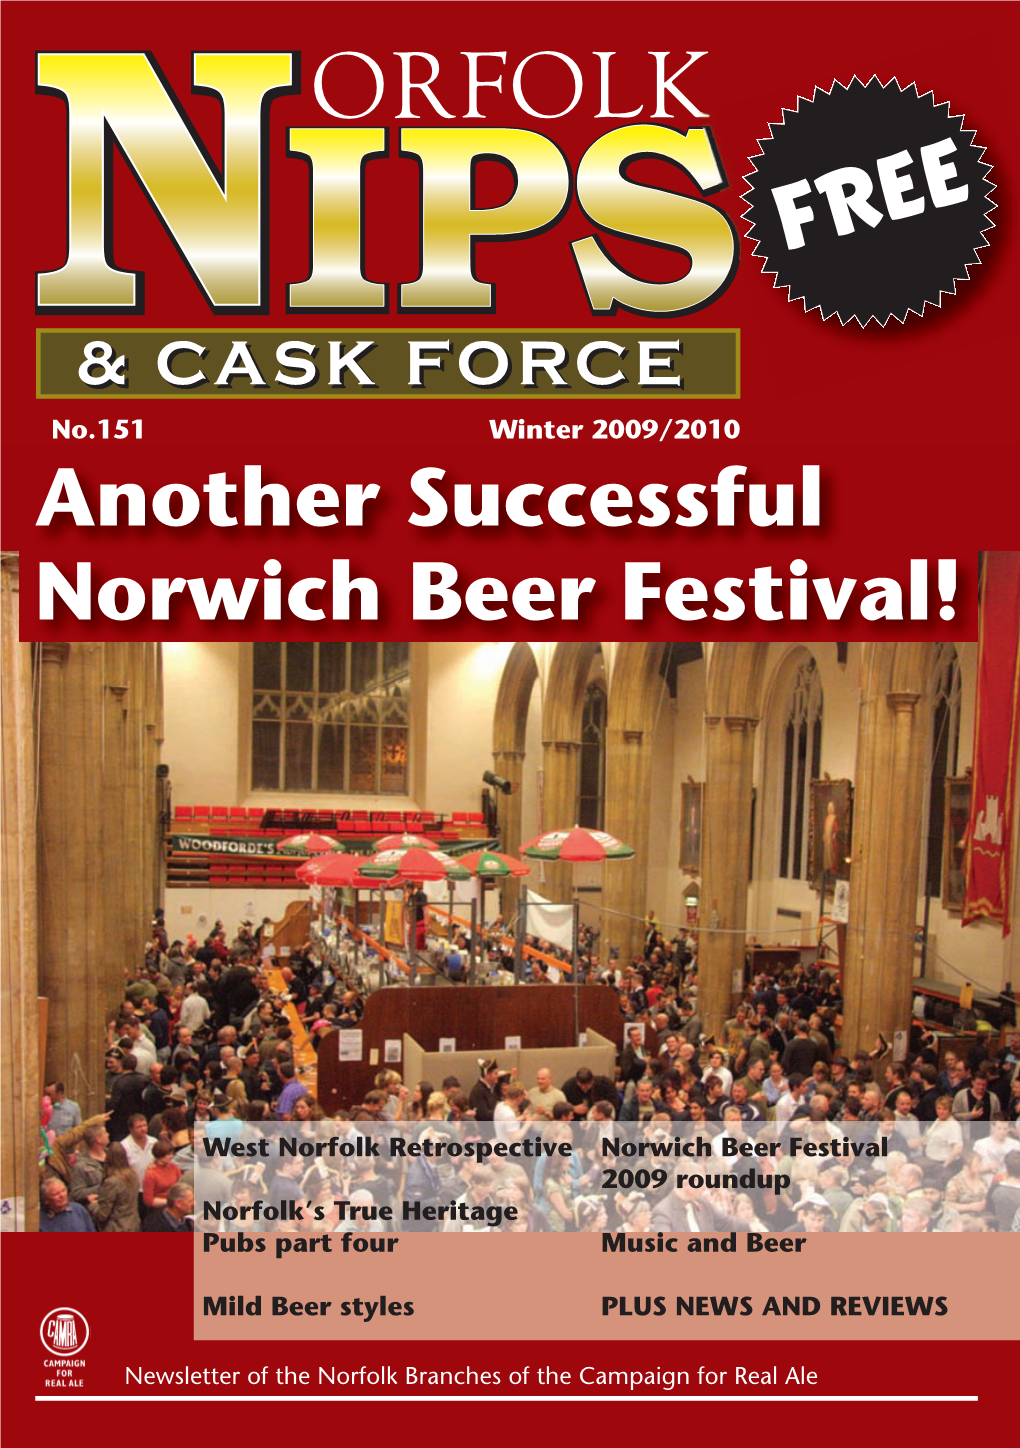 Another Successful Norwich Beer Festival!